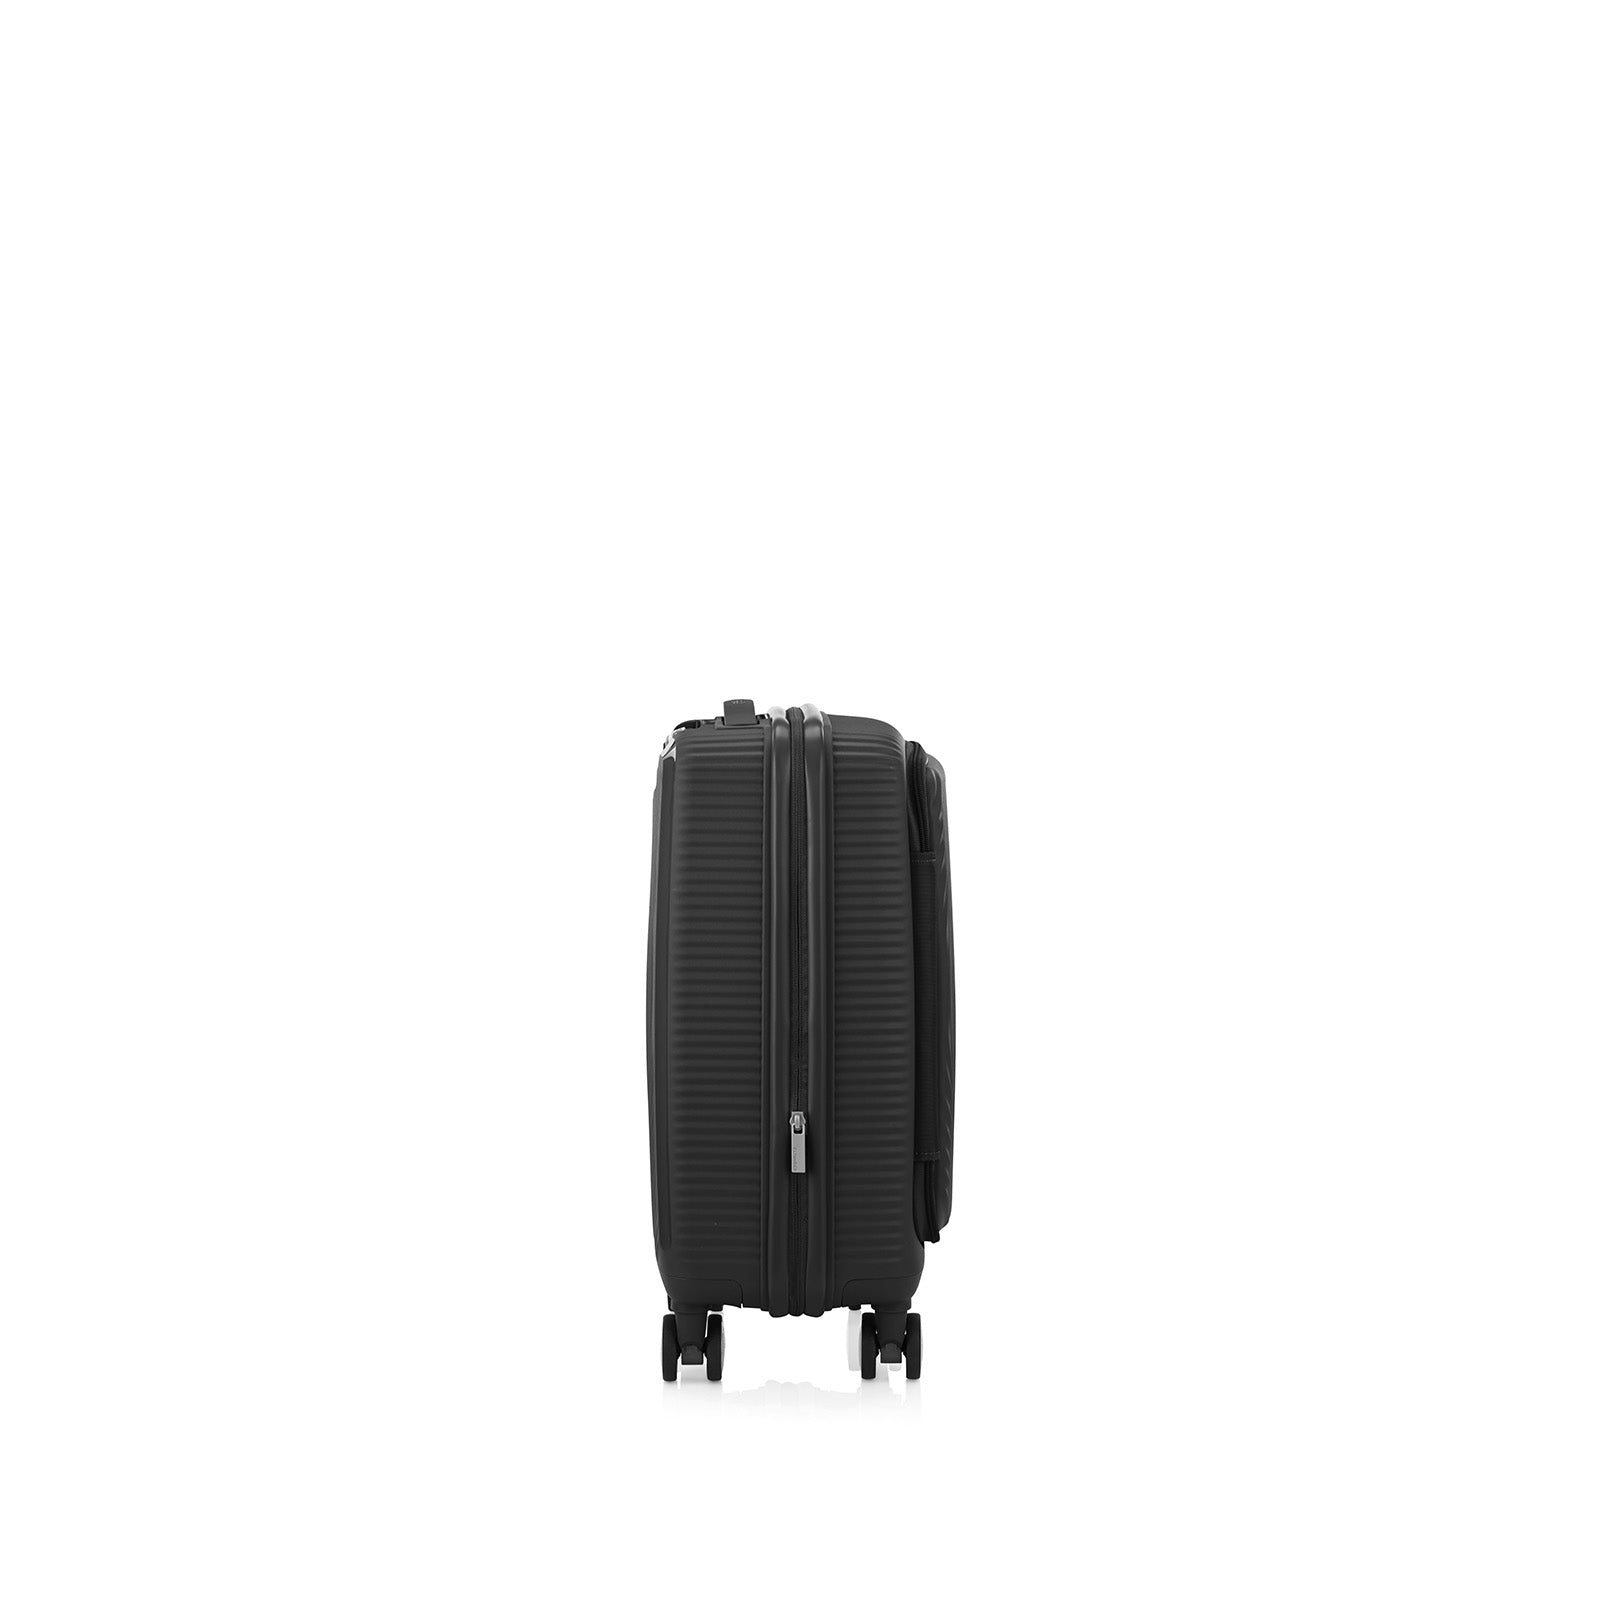 American-Tourister-Curio-Book-Opening-55cm-Carry-On-Suitcase-Black-Side